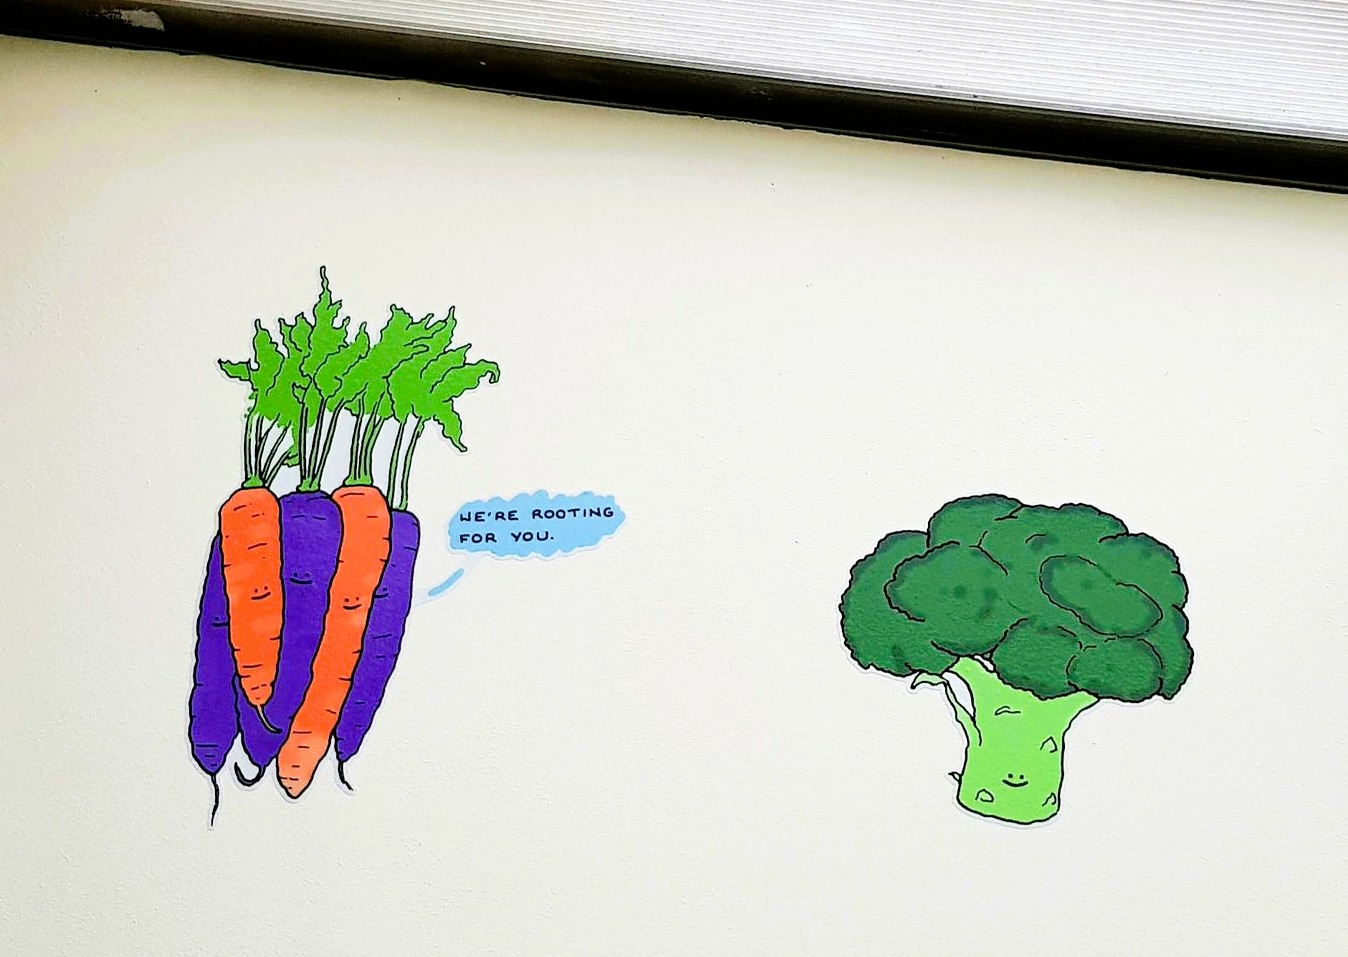 Photo of vinyl decals on a wall, they are anthropomorphised broccoli and carrots. One of the carrots is saying 